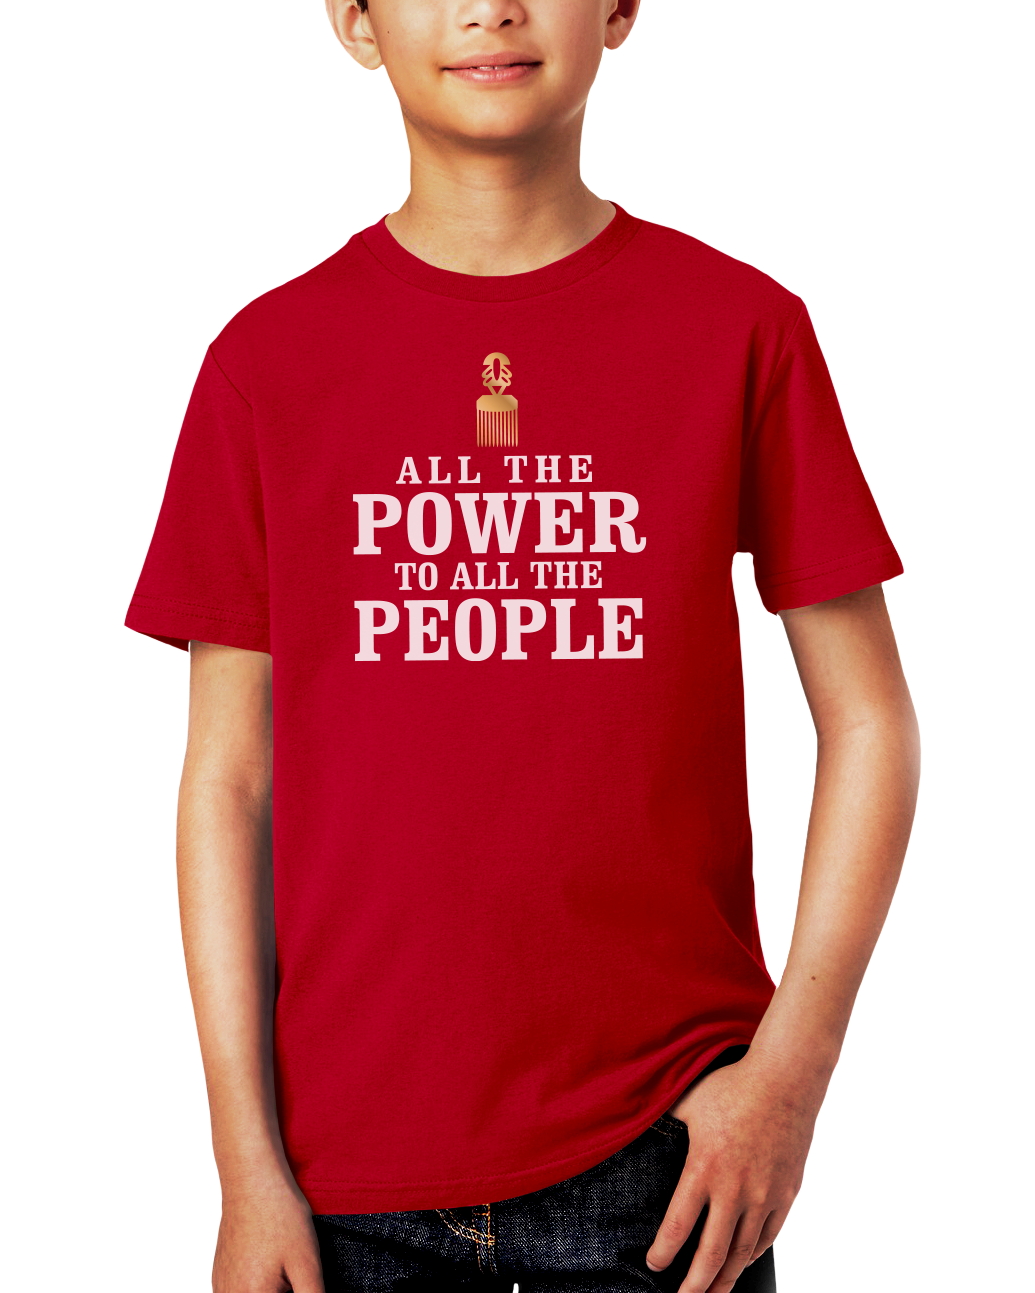 All The Power To All The People (BST)